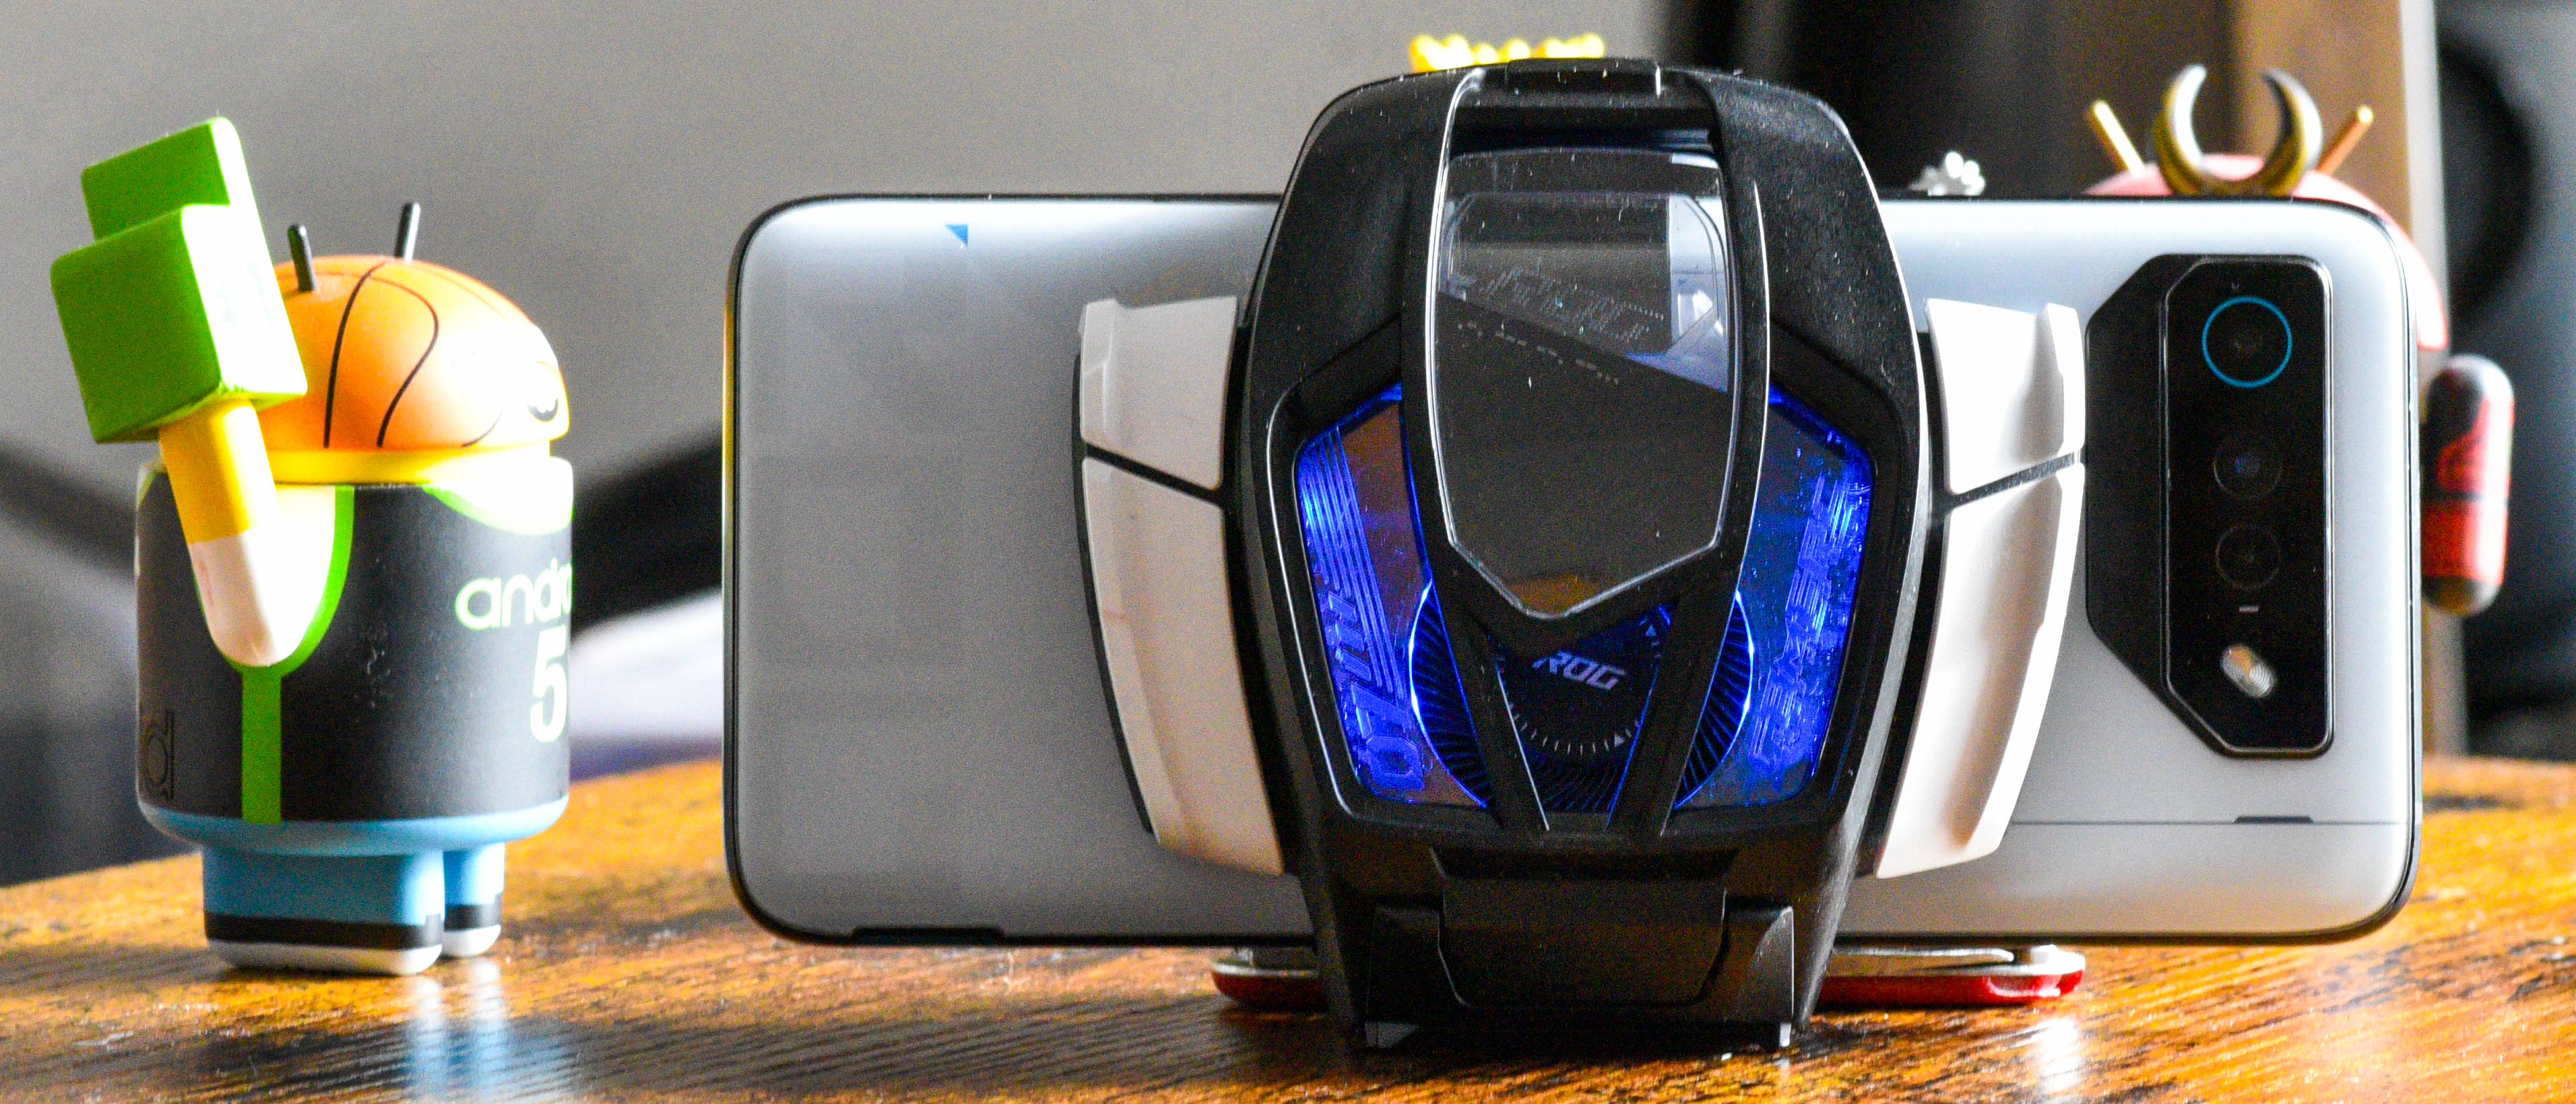 the ROG and coolest 7 Phone TechRadar gamer hottest | review: Asus Ultimate